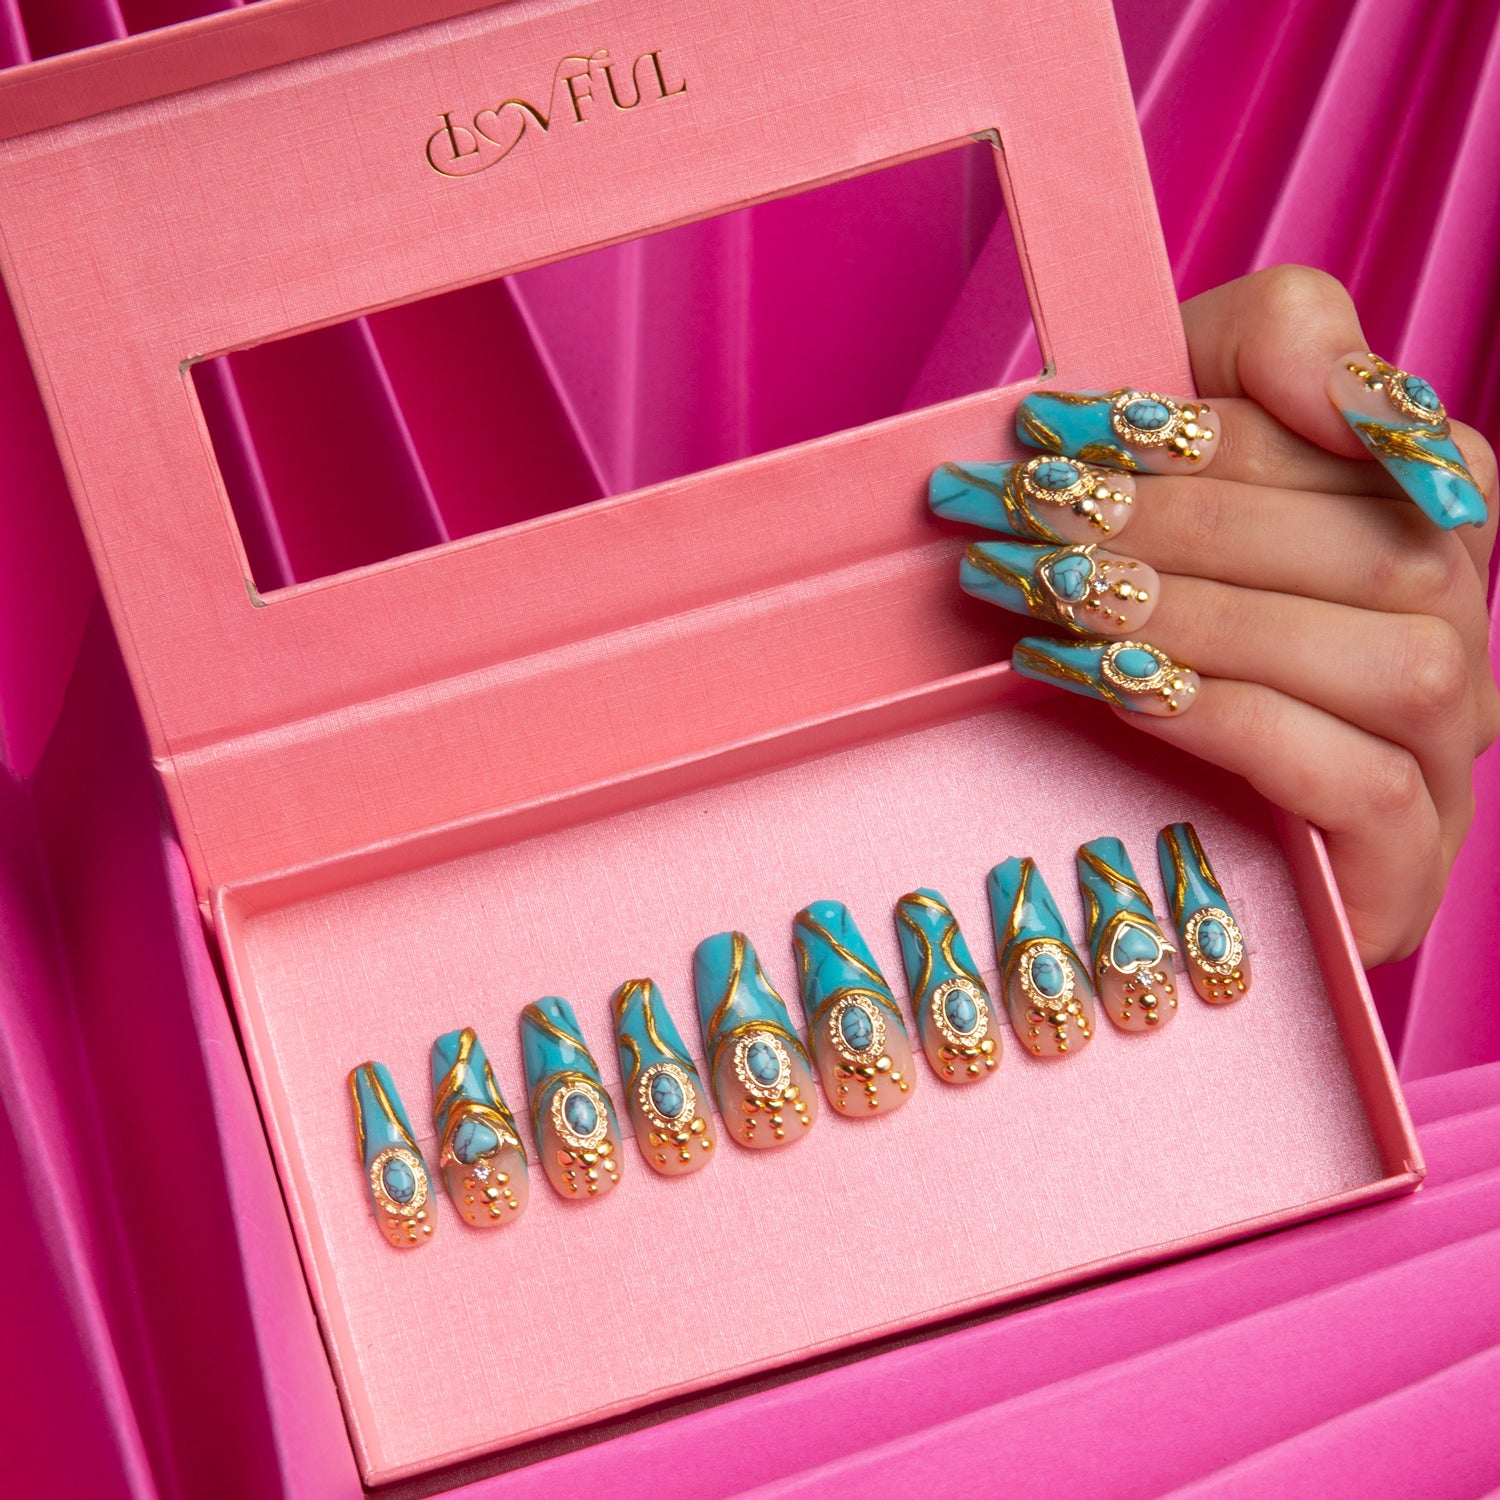 Turquoise coffin press-on nails with golden decor and sparkling gems in a pink box, held by a hand with matching nails, against a vibrant pink background. Lovful branded box.